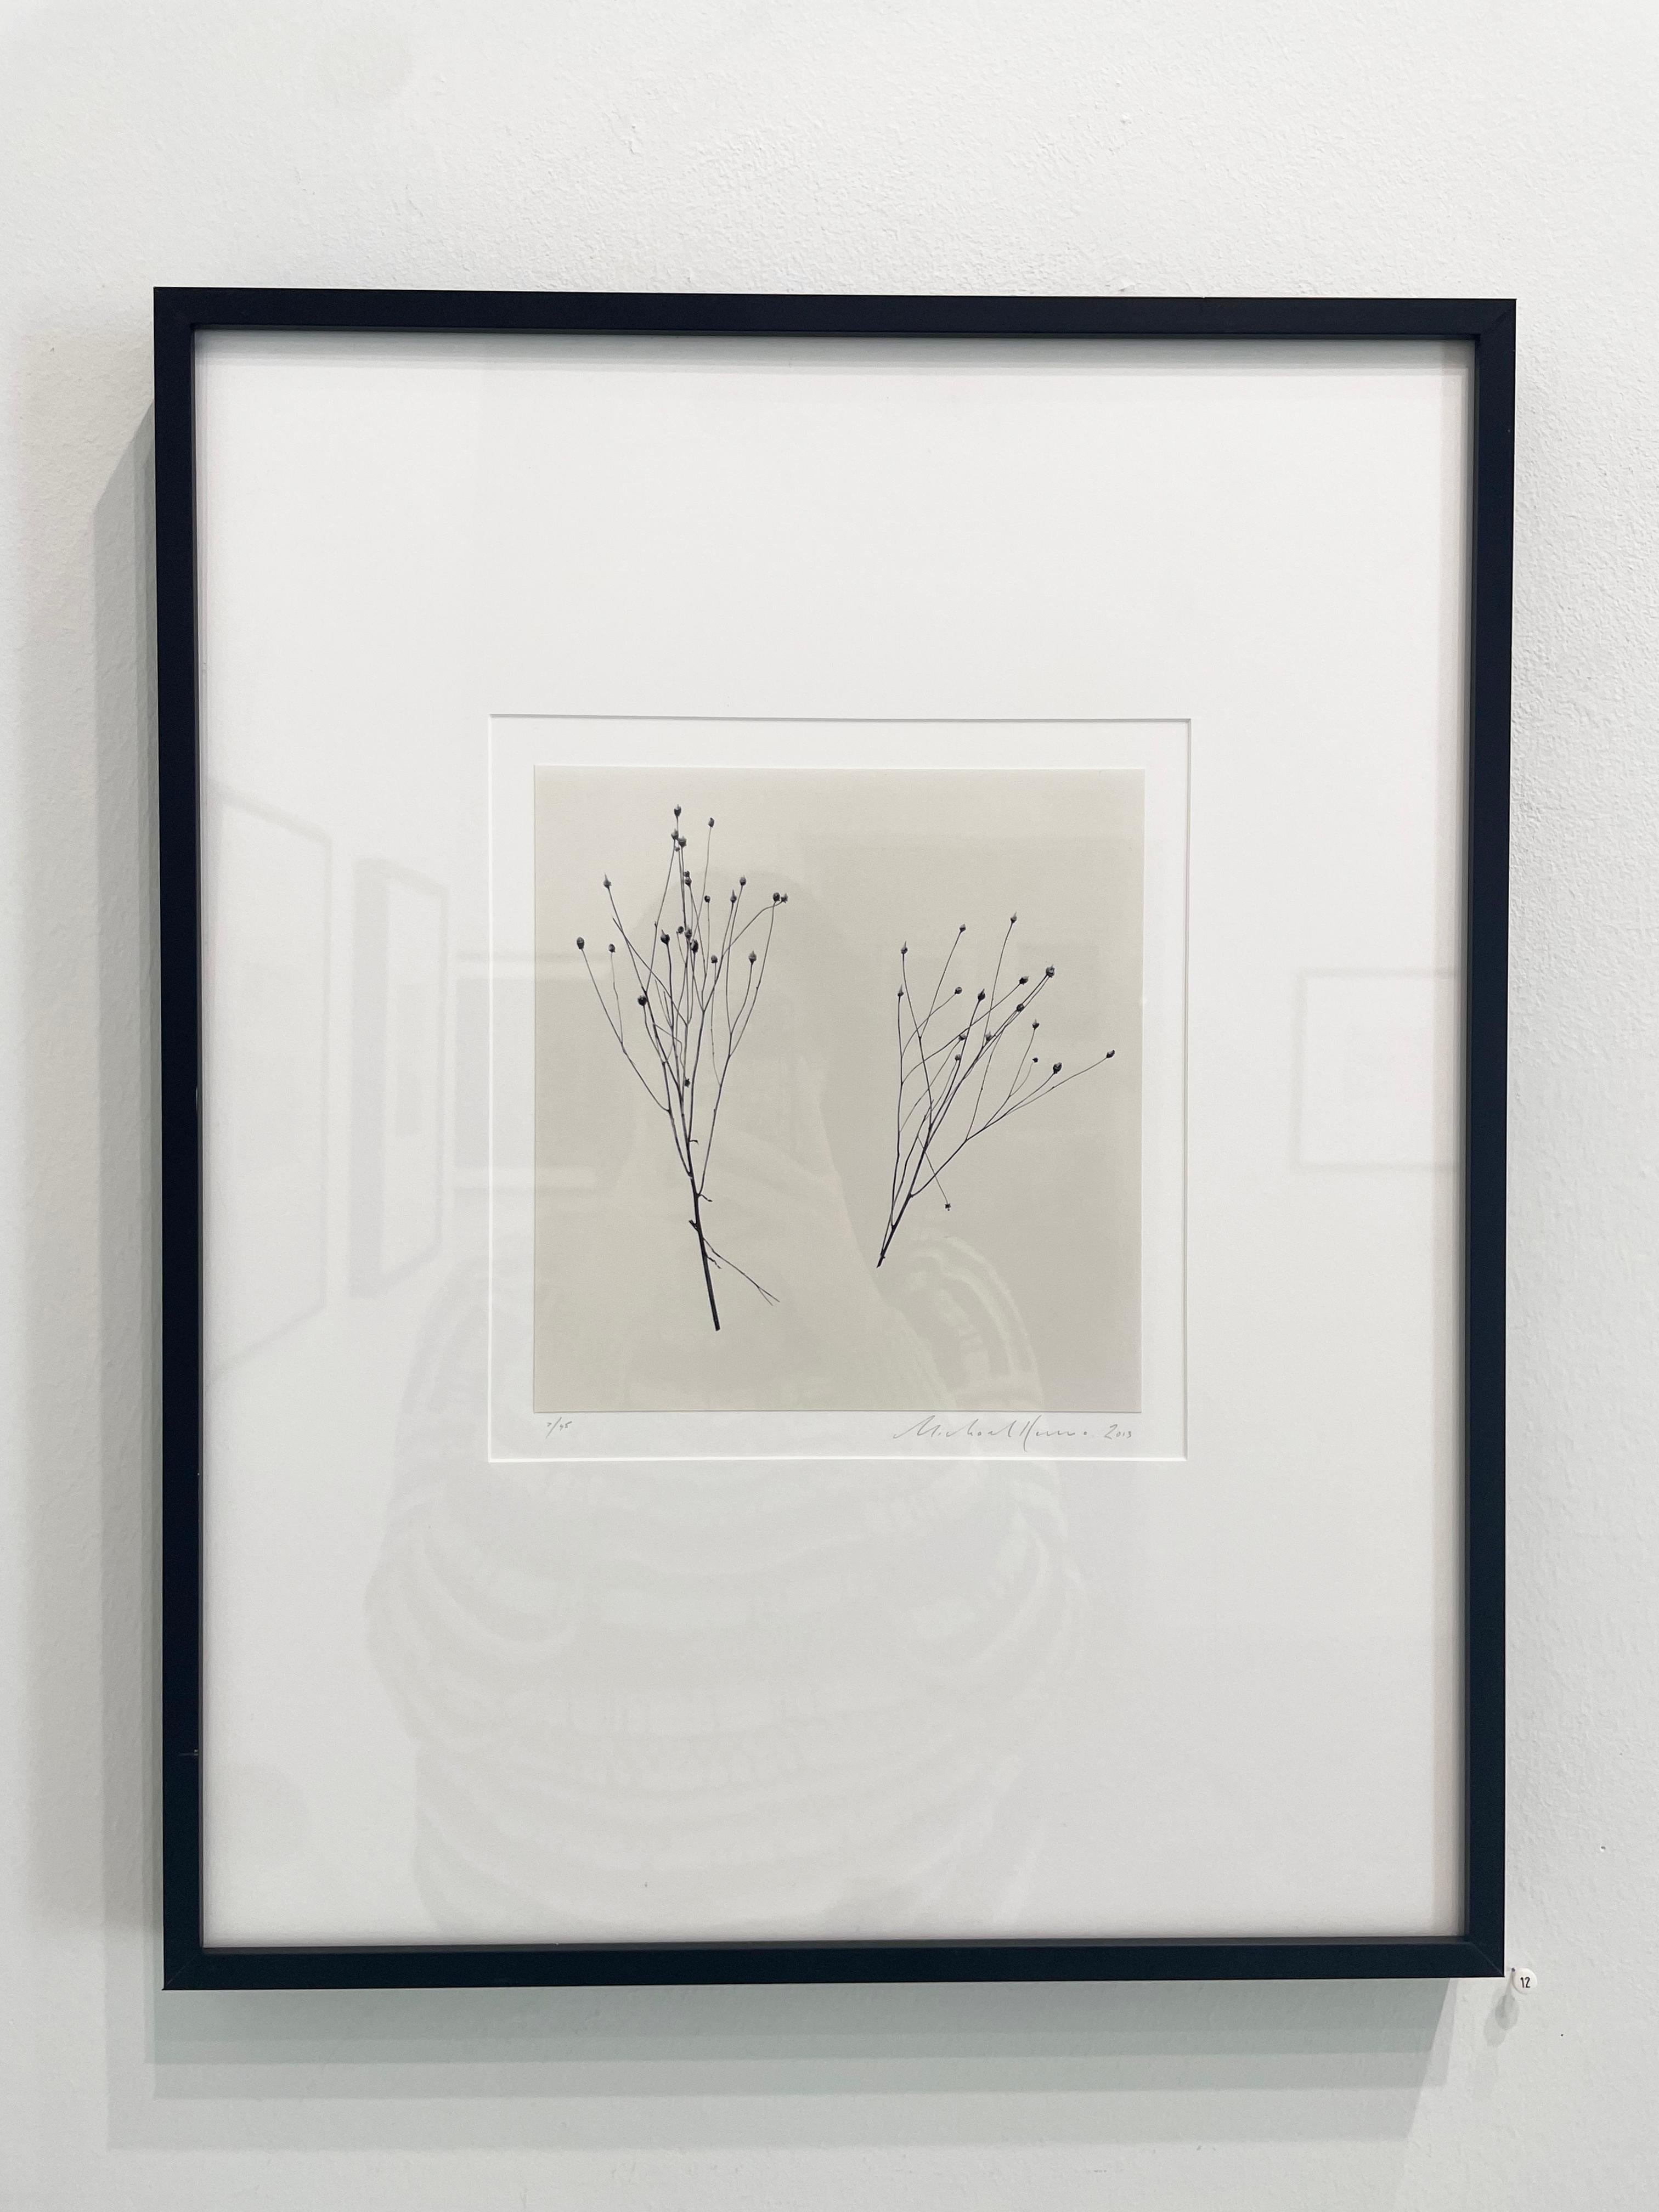 Edition of 45
Signed, titled, negative date, print date, and numbered by Michael Kenna
Sepia toned gelatin silver print

Michael Kenna's black and white photographs are powerful and alluring. His imagery transports you to iconic and placid